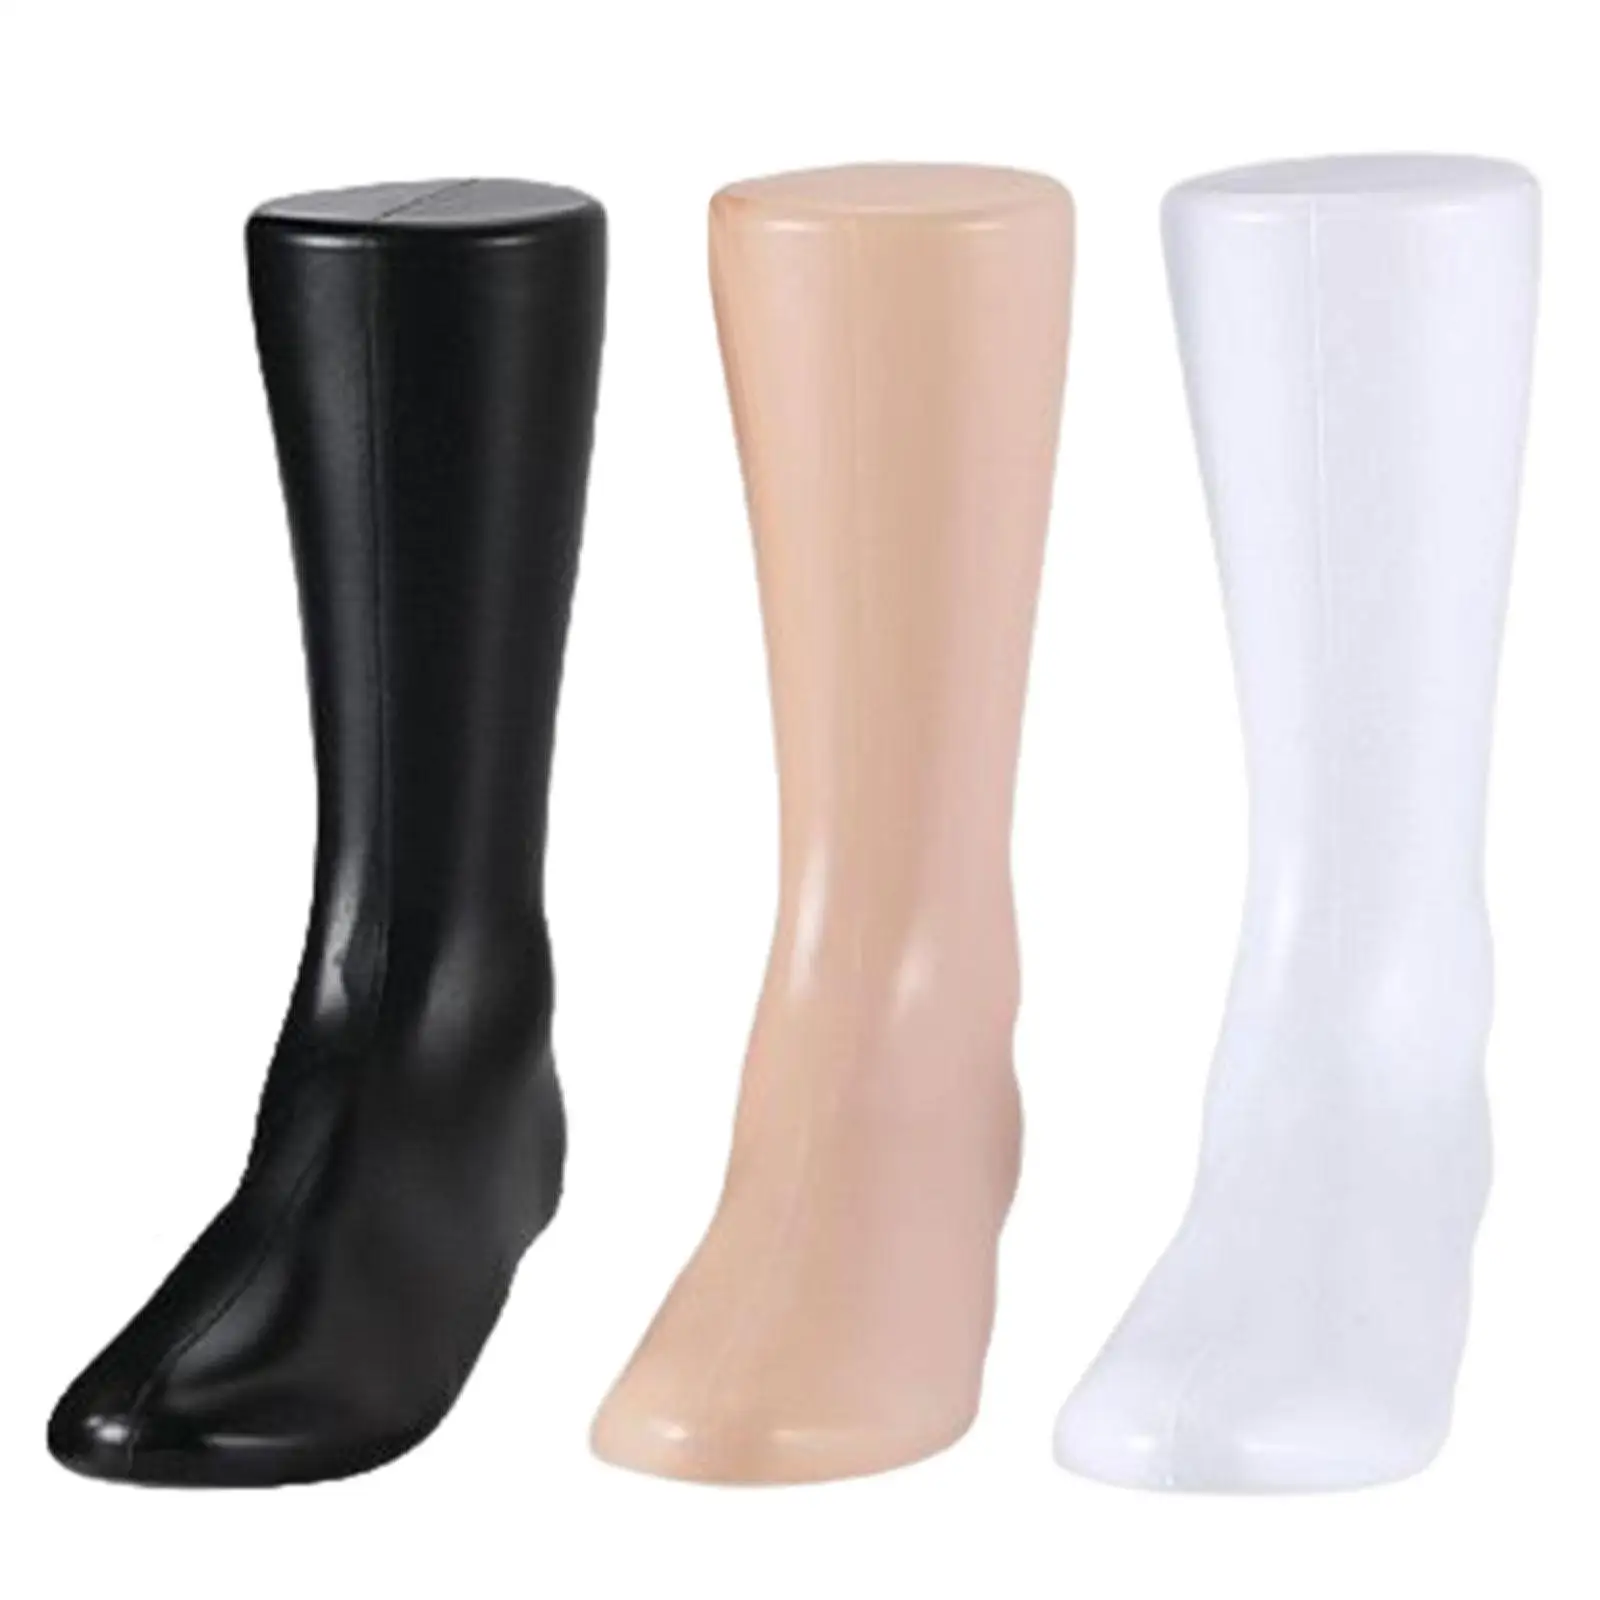 Lifesize Female Mannequin Foot Women Foot Sock Display Mold for Shoes Home